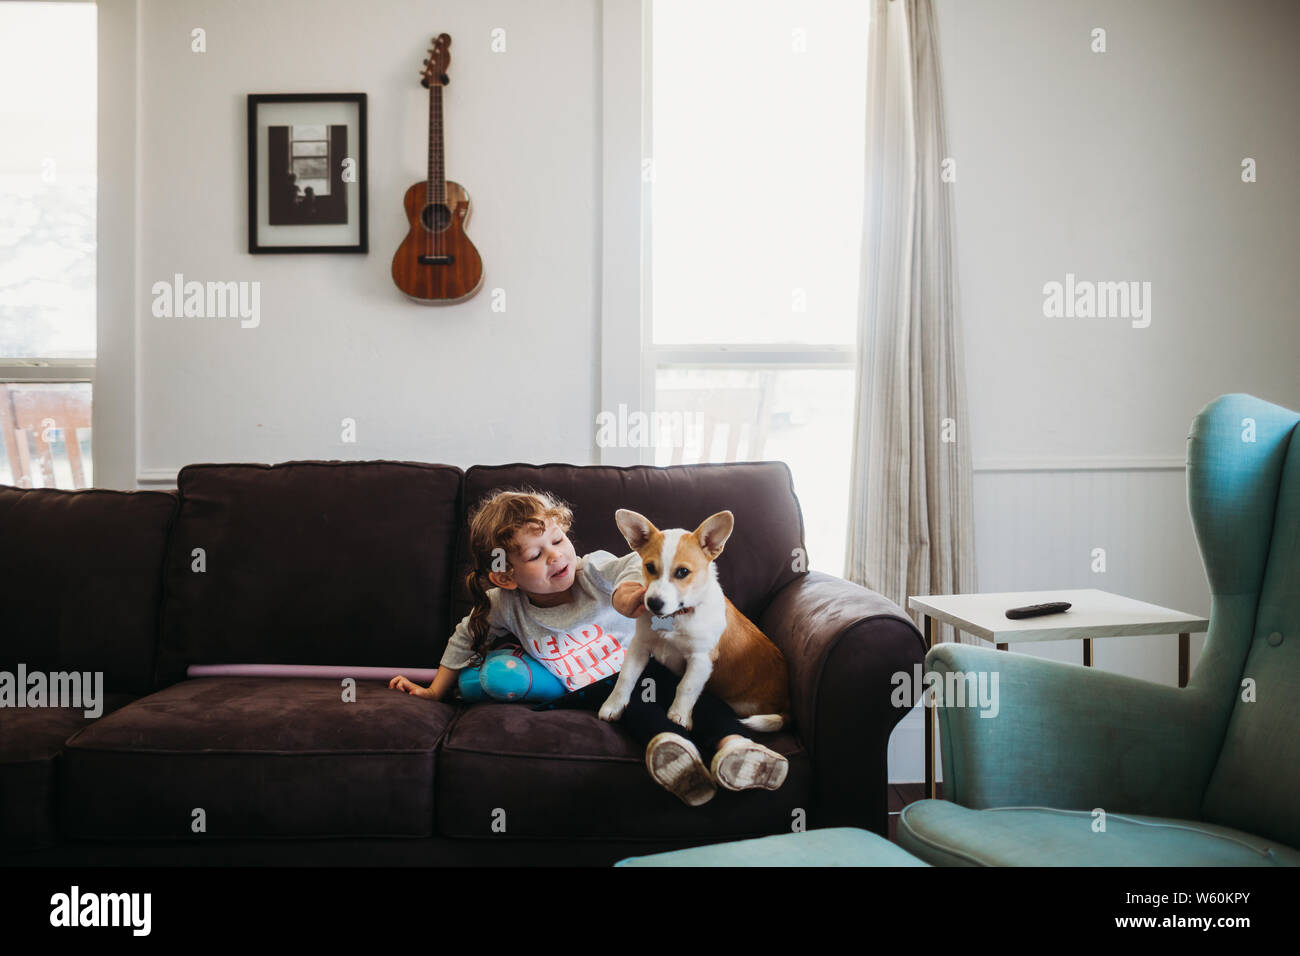 Young girl playing with corgi puppy on couch in living room Stock Photo